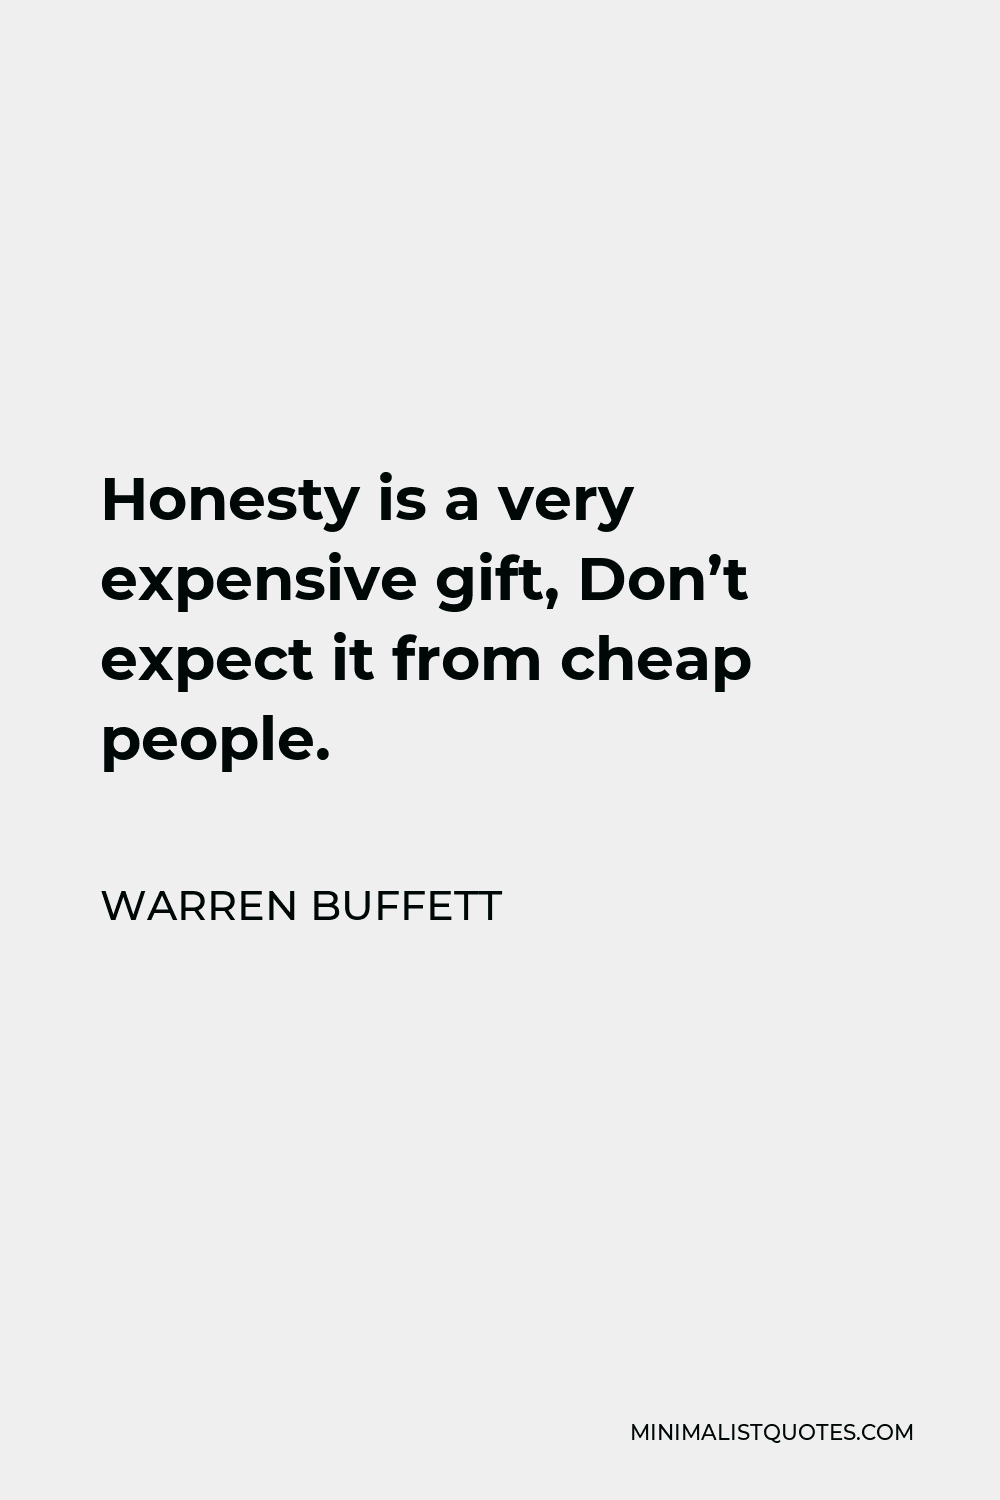 Honesty is a very expensive gift. Don't expect it from cheap people.  –Warren Buffett